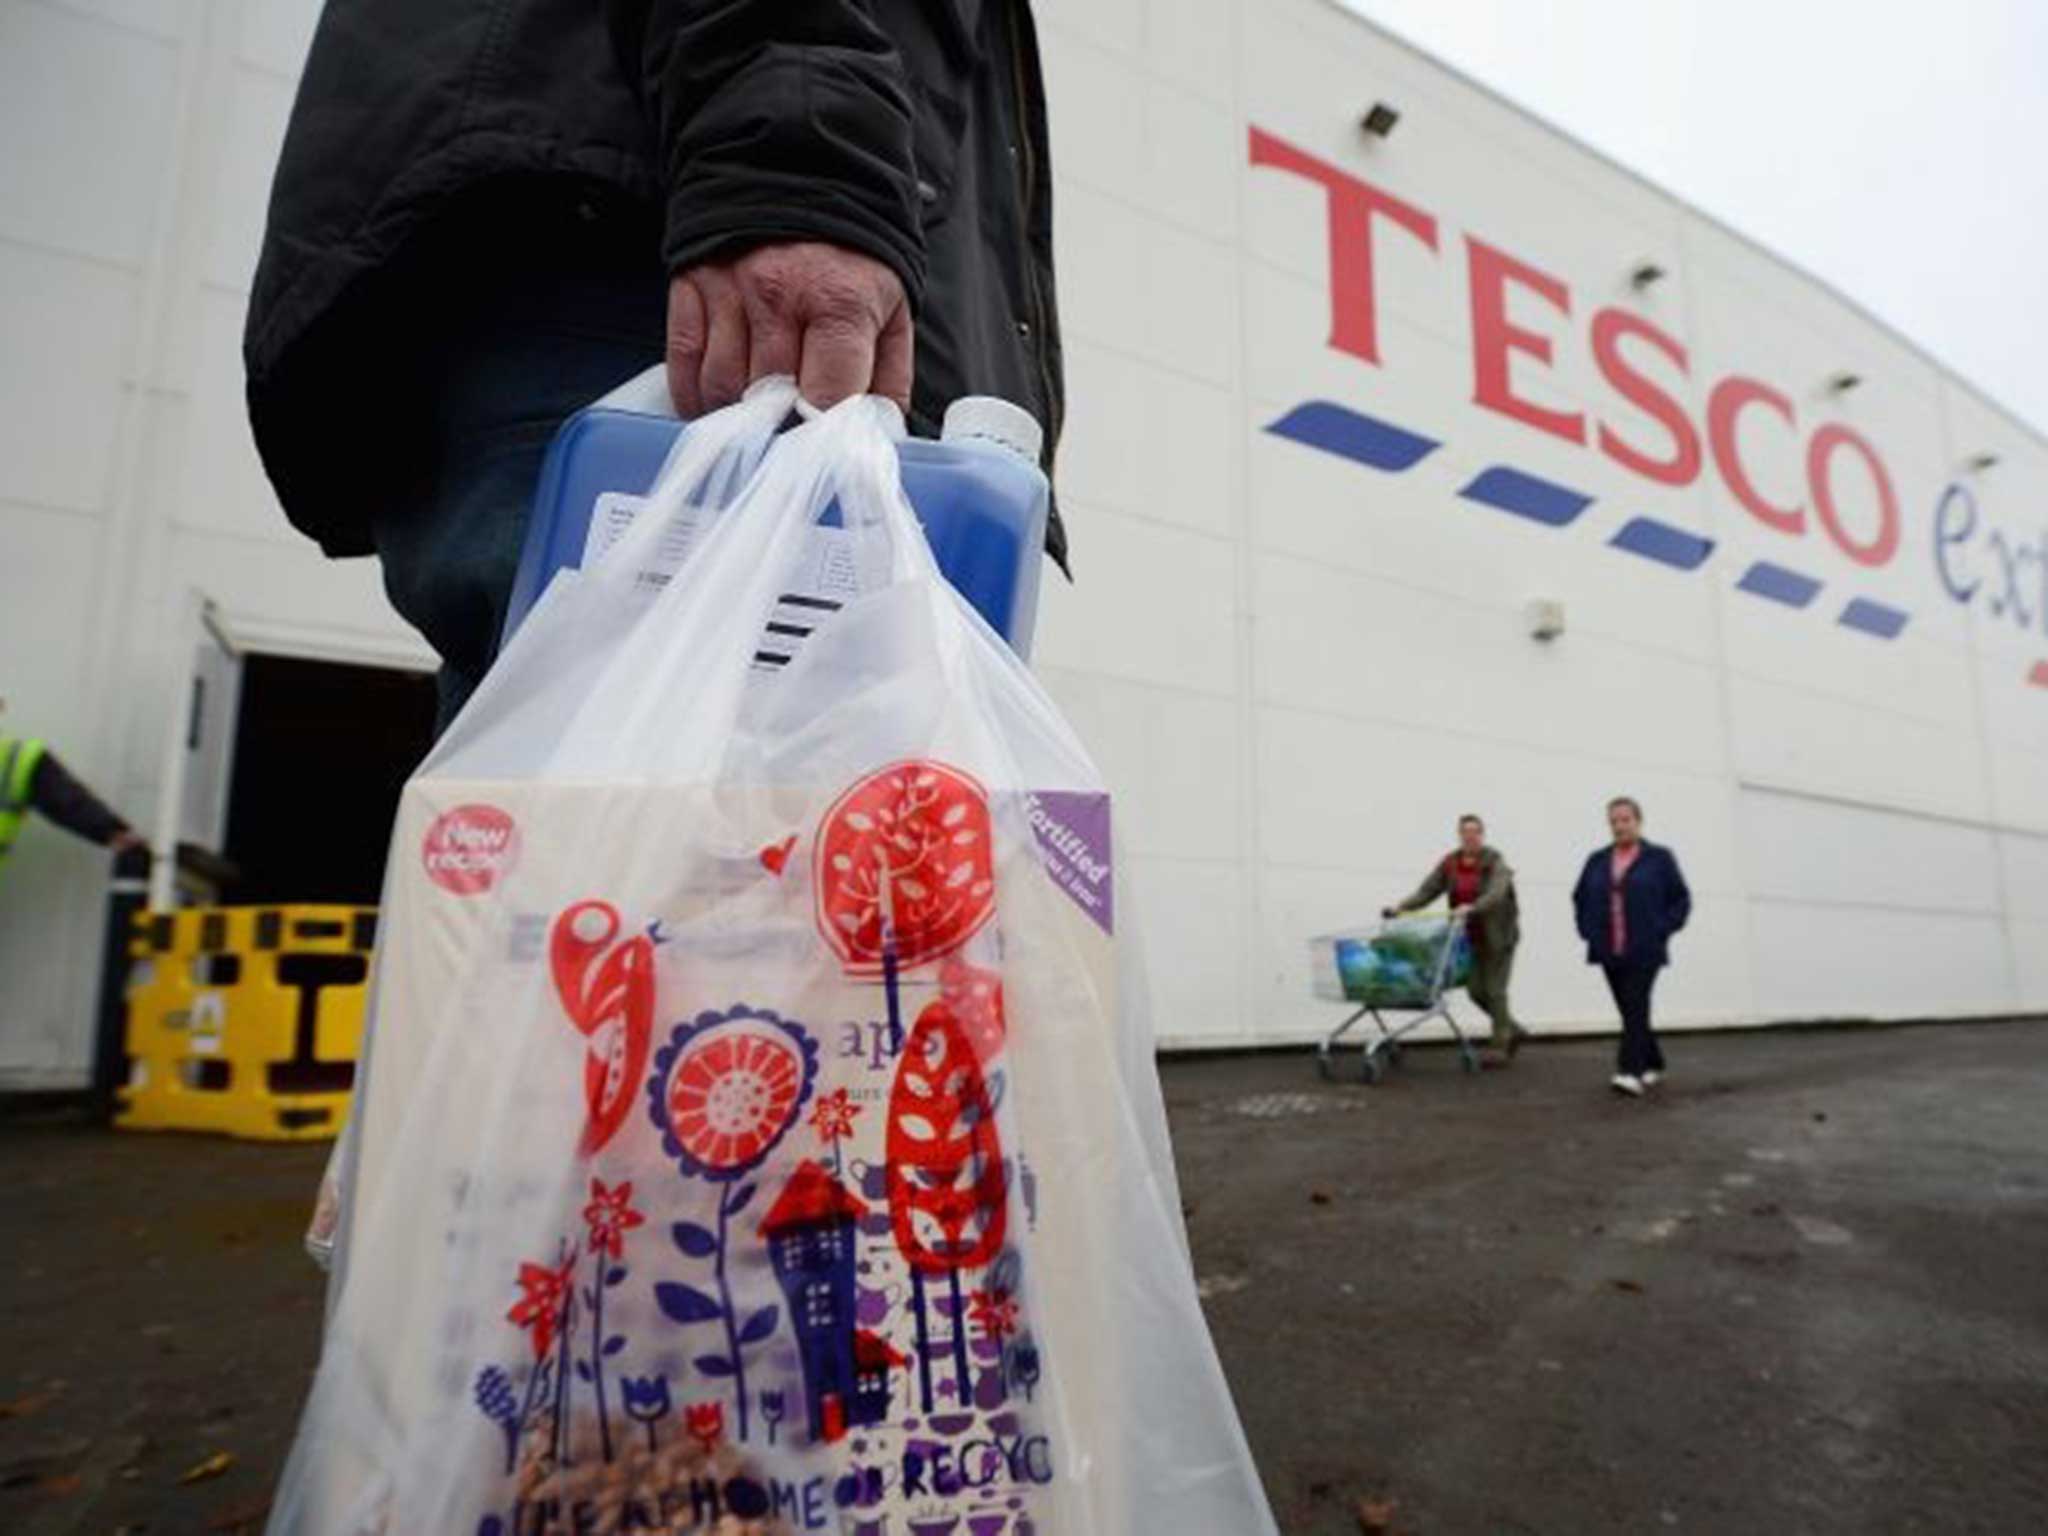 Tesco’s ‘smart retailers’ mean it cannot be counted out